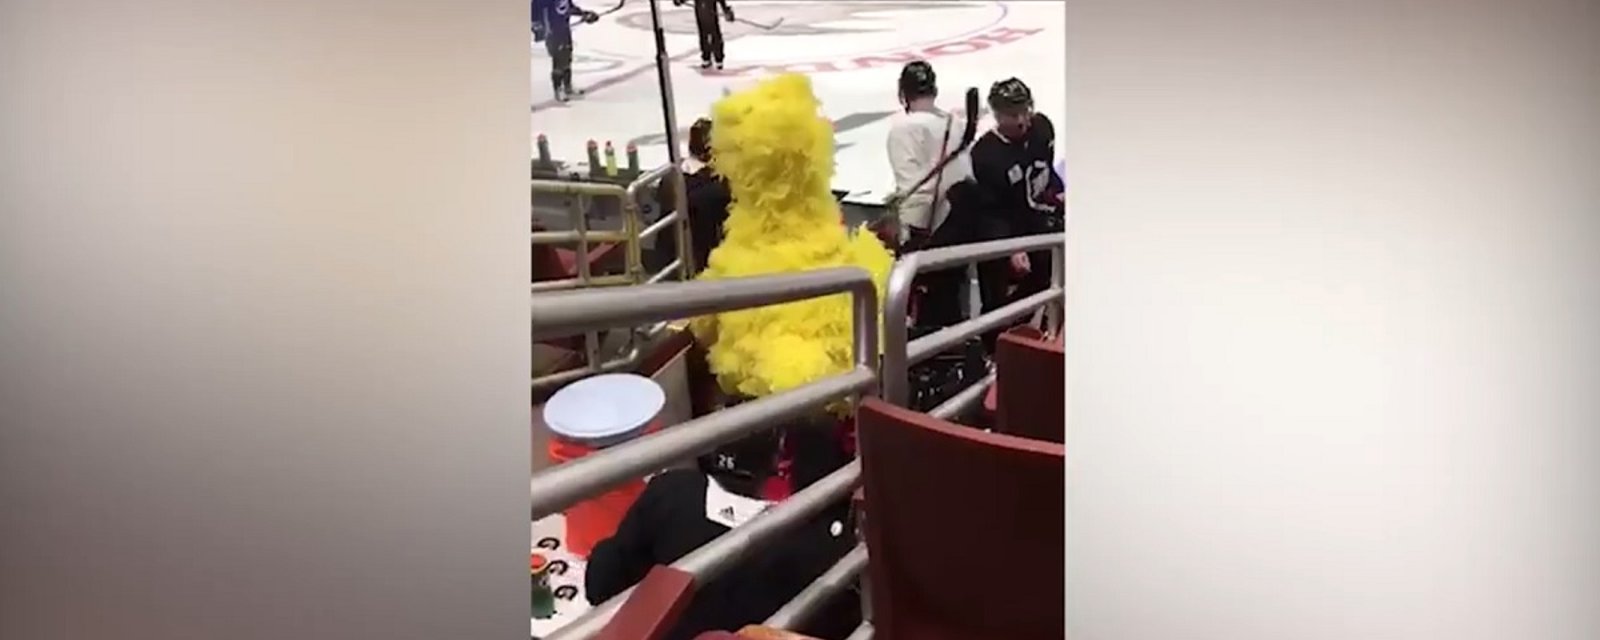 NHL star hits the ice as big bird during Tuesday practice. 